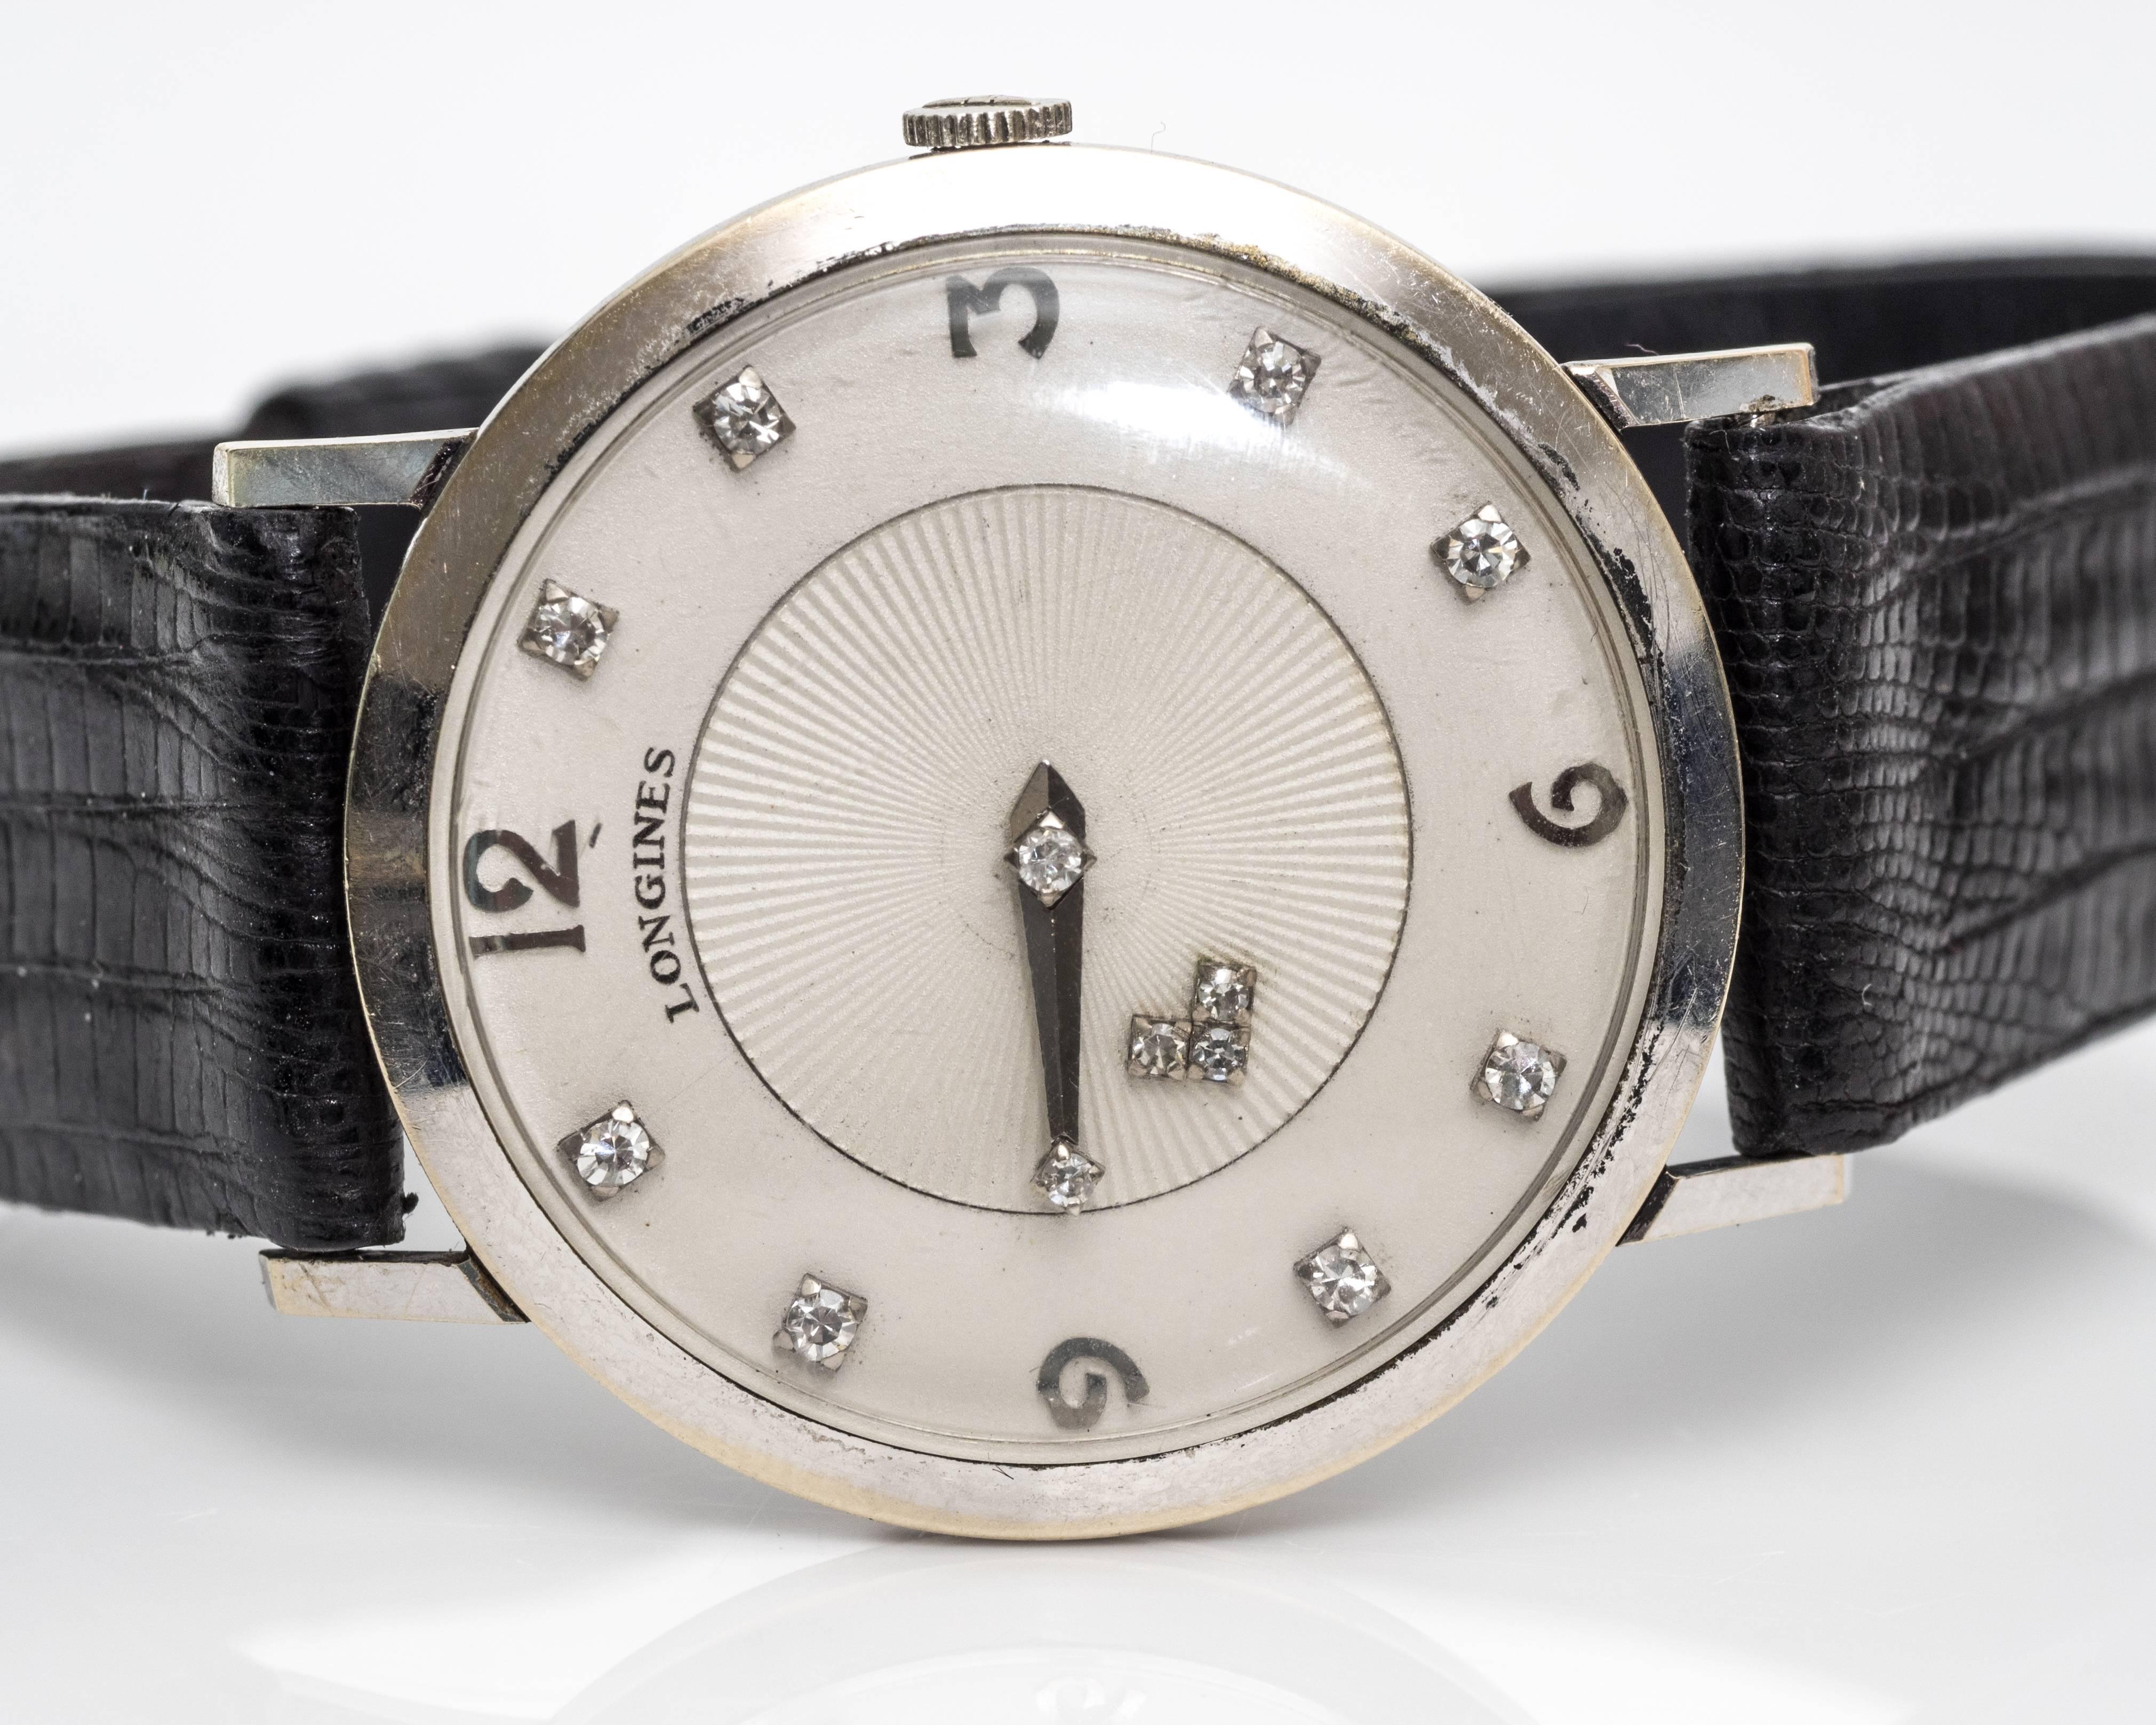 Longines 1950s 14 Karat White Gold and Diamond Mystery Wristwatch
Unisex
Embodies Simple Sophistication 
Face of Watch crafted in 14 Karat White Gold 
Features 13 Diamonds - eight of which are represented as hour markers. Hour marks 3, 6, 9 and 12